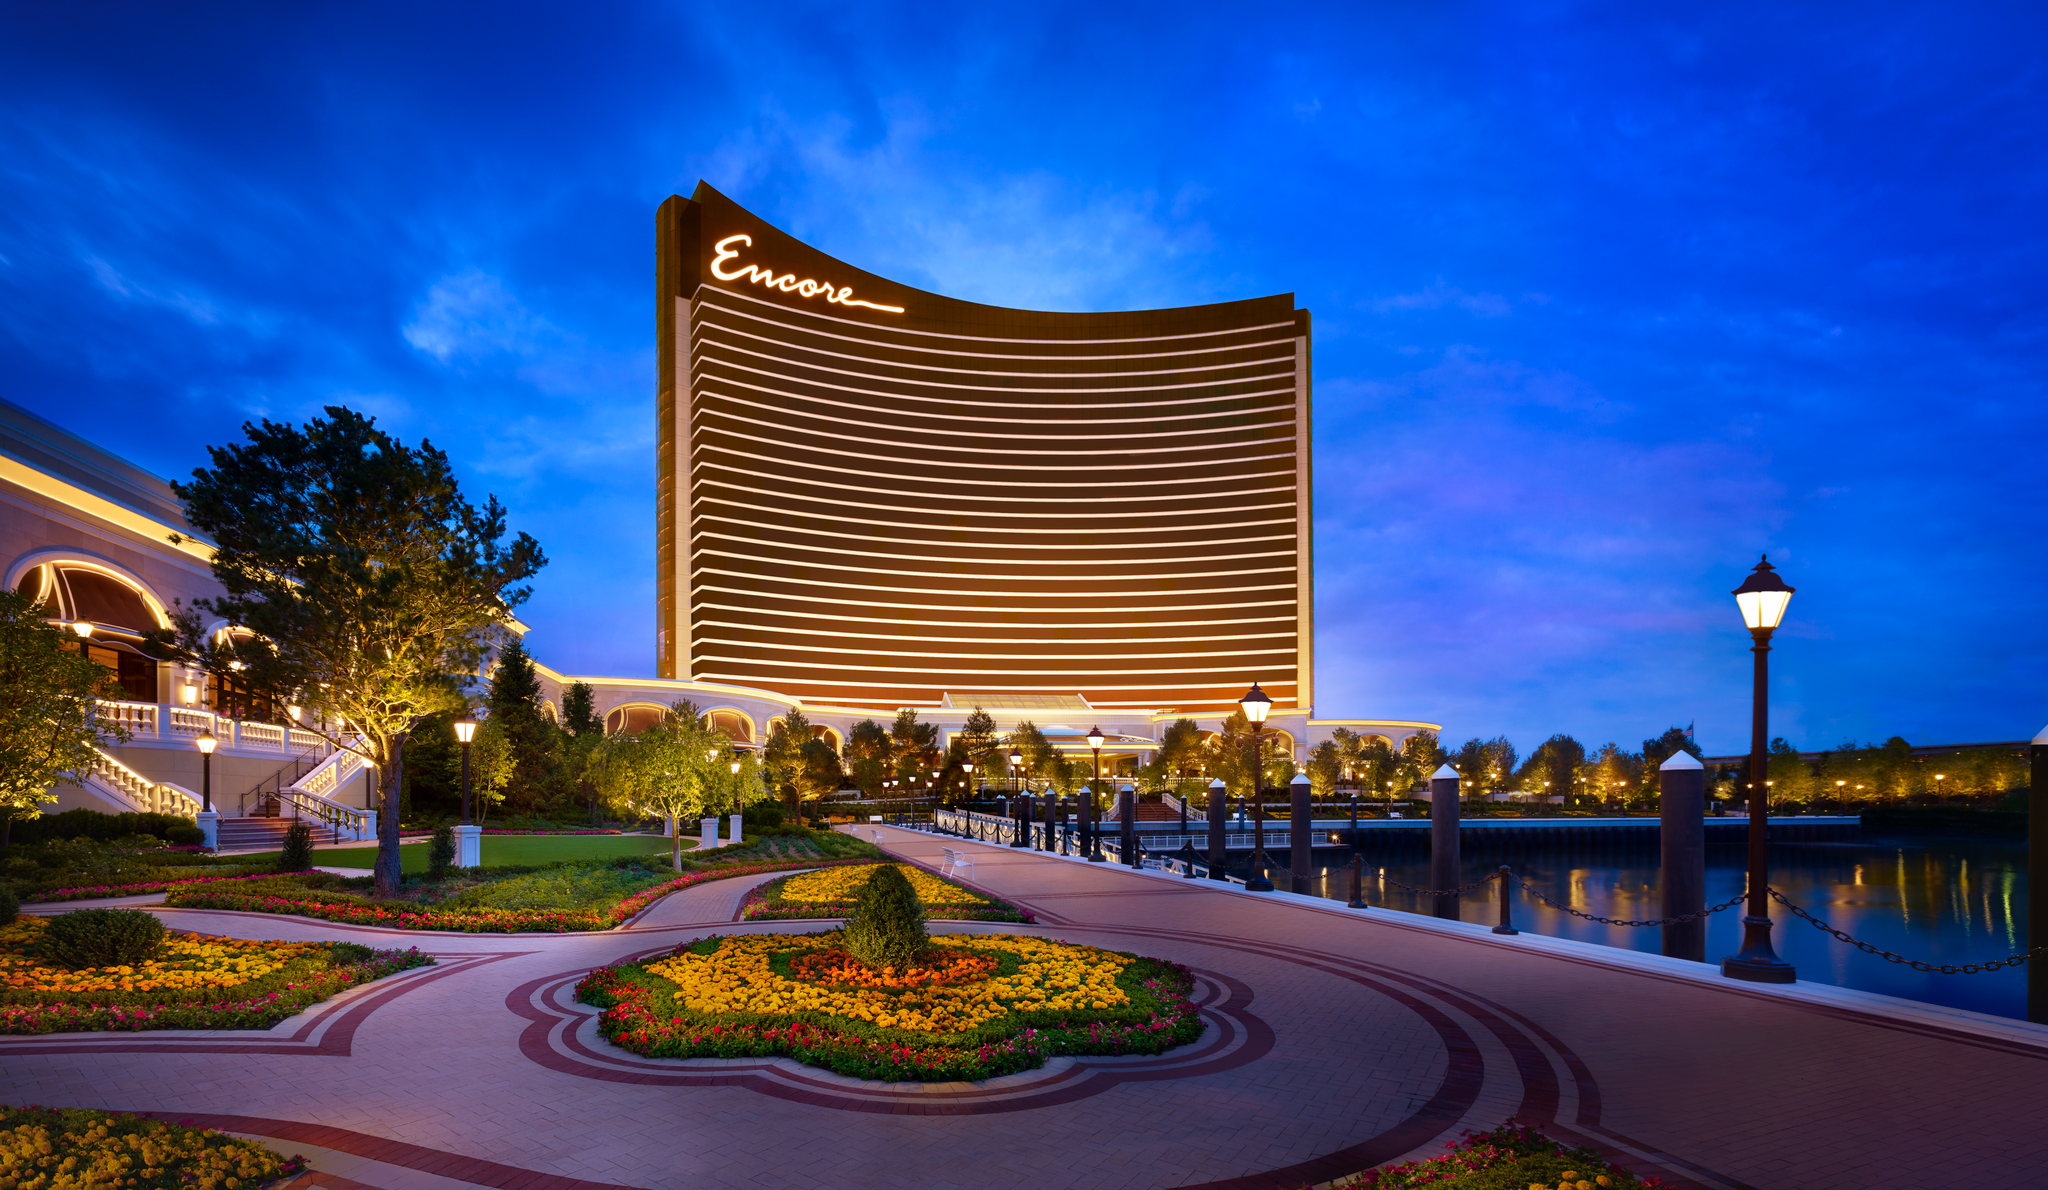 Encore Boston Harbor is the Official Resort & Casino of the Pan-Mass Challenge